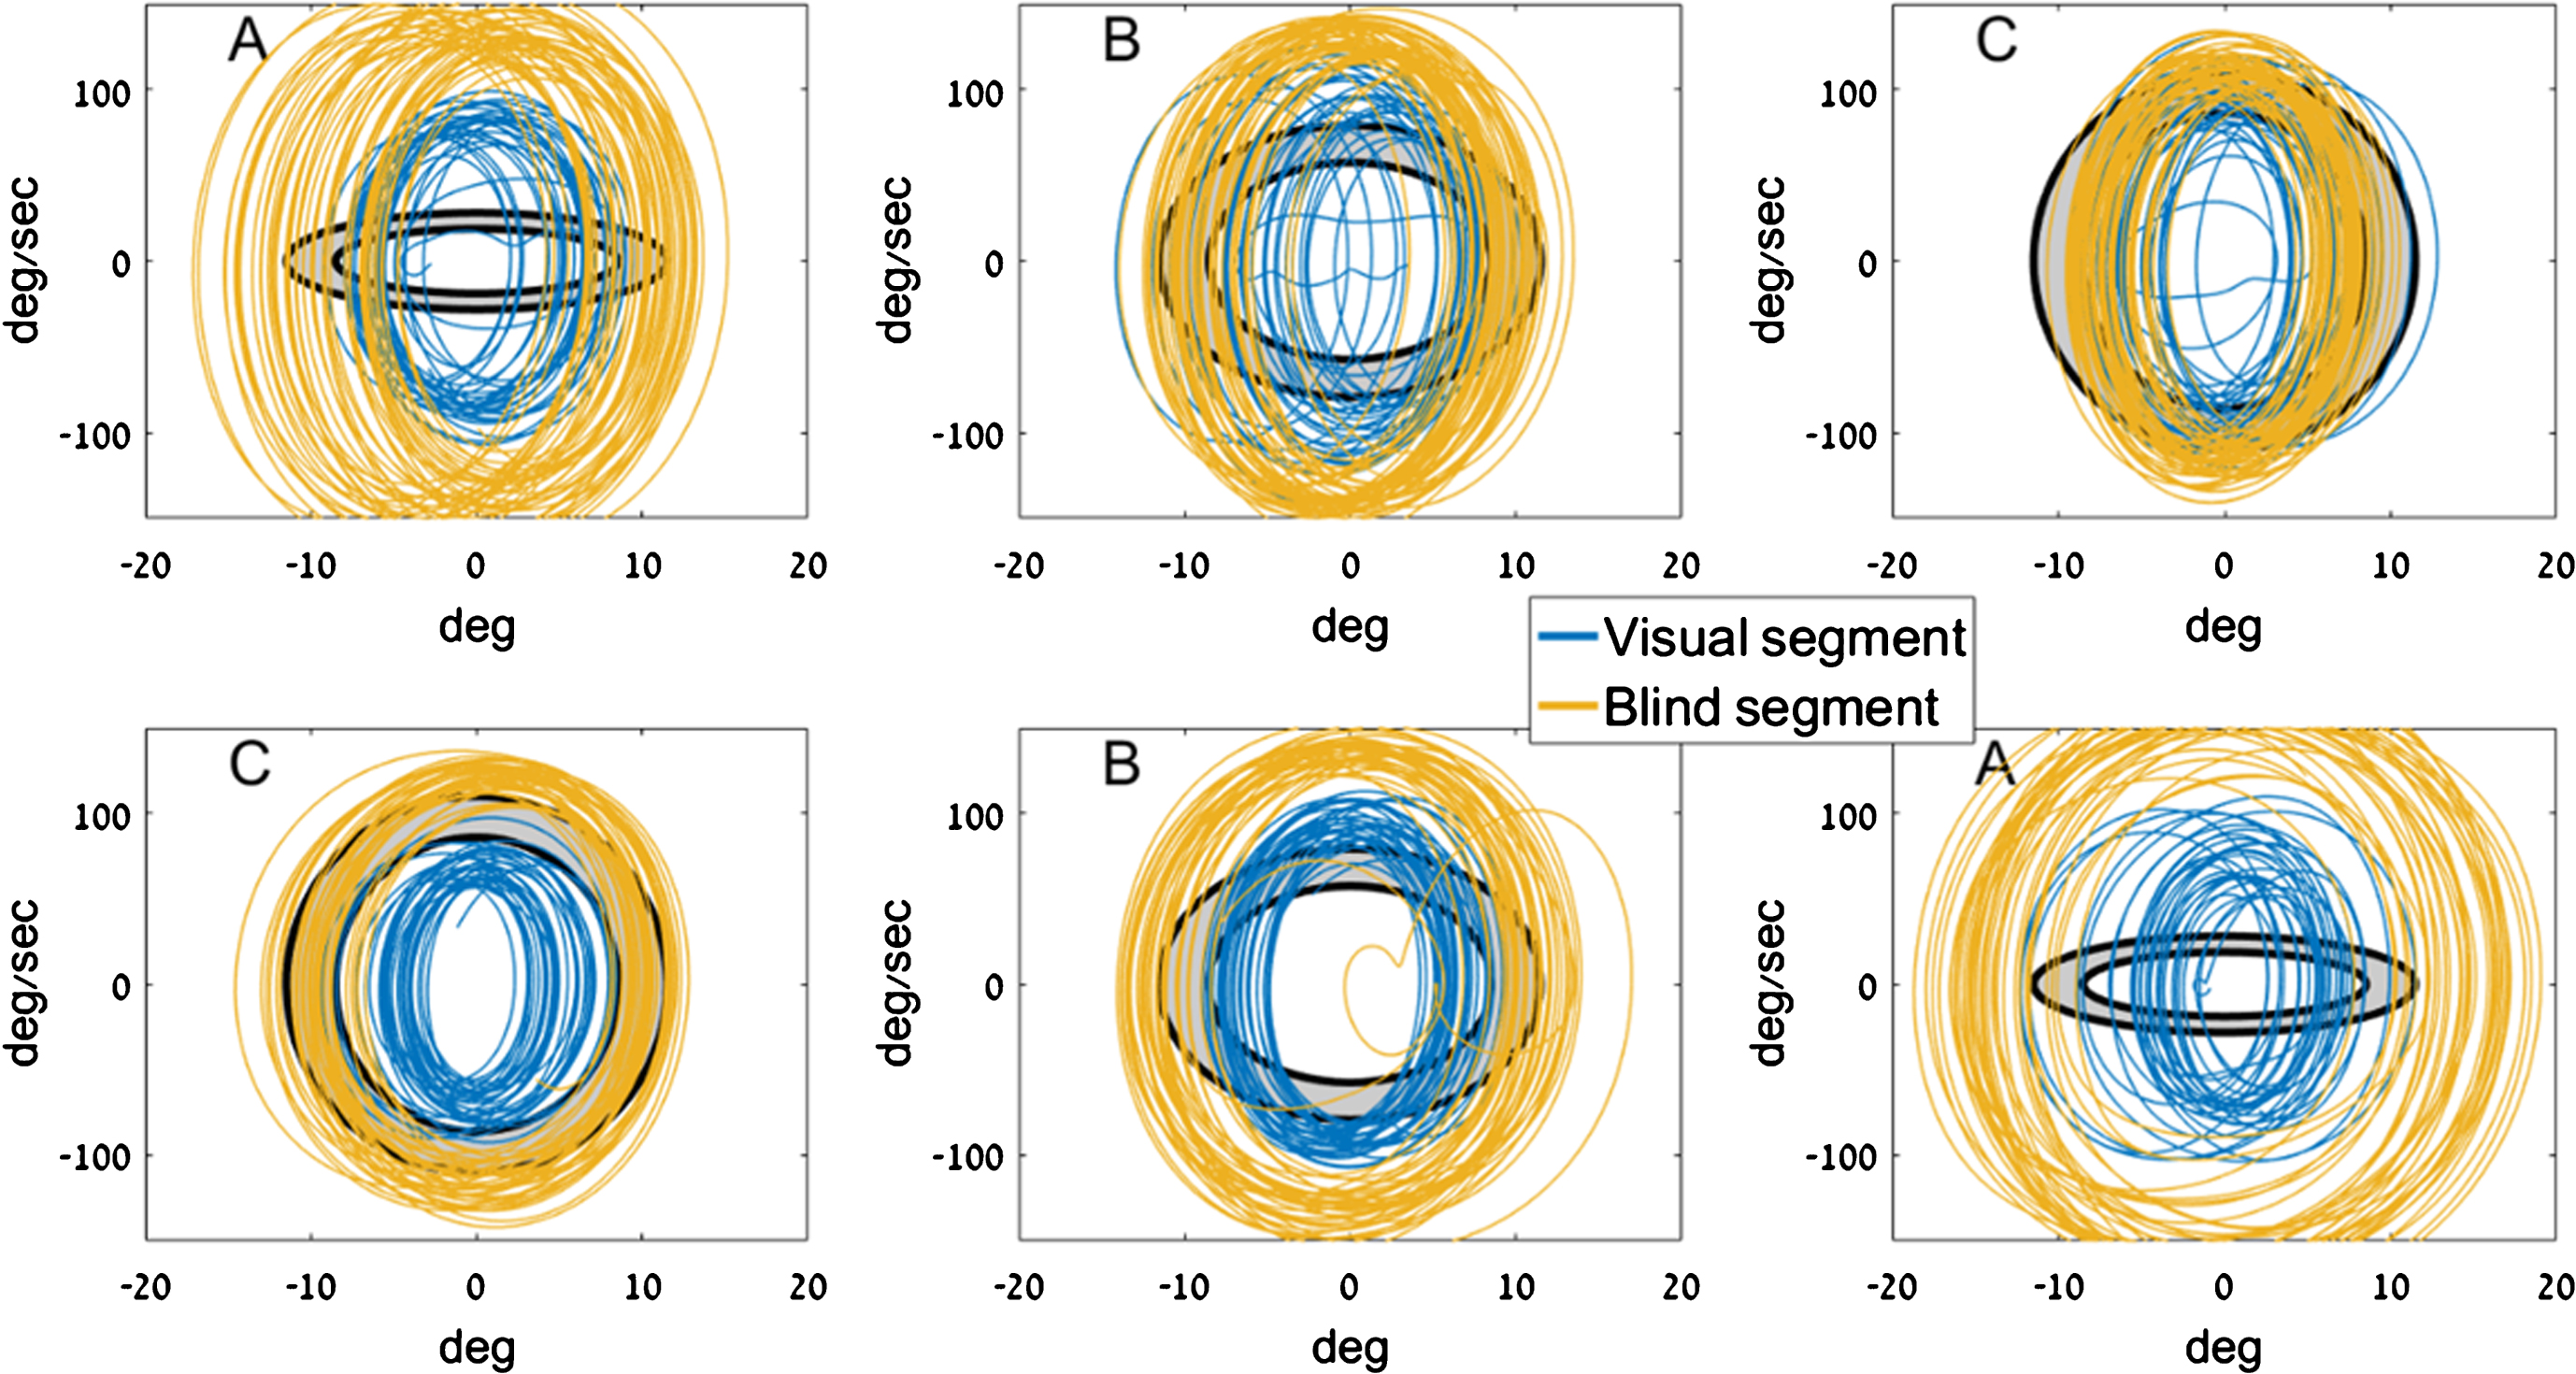 Sample traces from two participants. Each row shows three consecutive trials by a single participant. The letter at the top left denotes the target ellipse size. The target zone on the phase plane is marked in gray, bounded by two concentric black ellipses. Shown in blue are traces from the V1(visual) segment, and in mustard are traces from B2 (no visual feedback). Movements in B2 are consistently larger and faster than movements in V1.